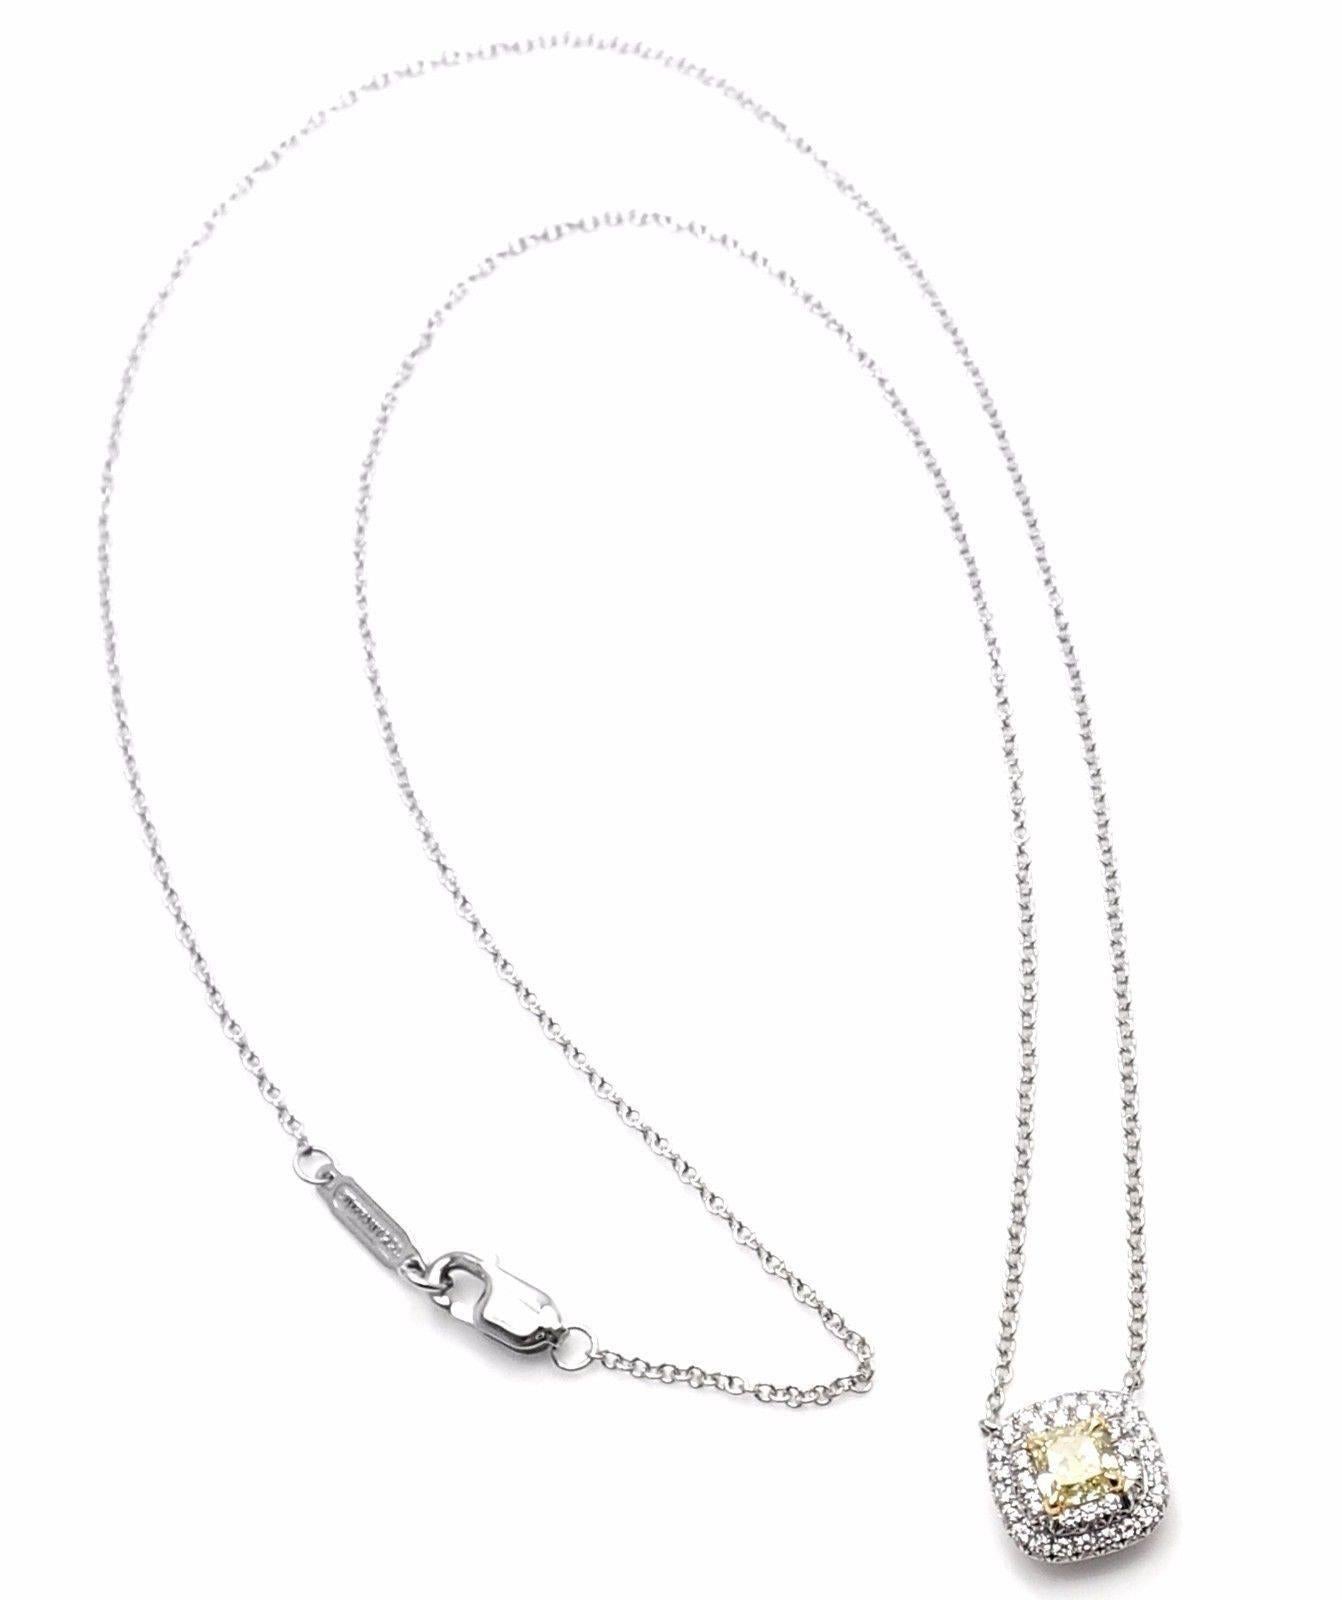 Platinum And 18k White Gold Soleste Yellow And White Diamond Pendant Necklace by Tiffany & Co. 
With 1 cushion modified brilliant cut fancy yellow diamond carat weight .34ct
round brilliant cut diamonds VS1 clarity, G color total weight approx.